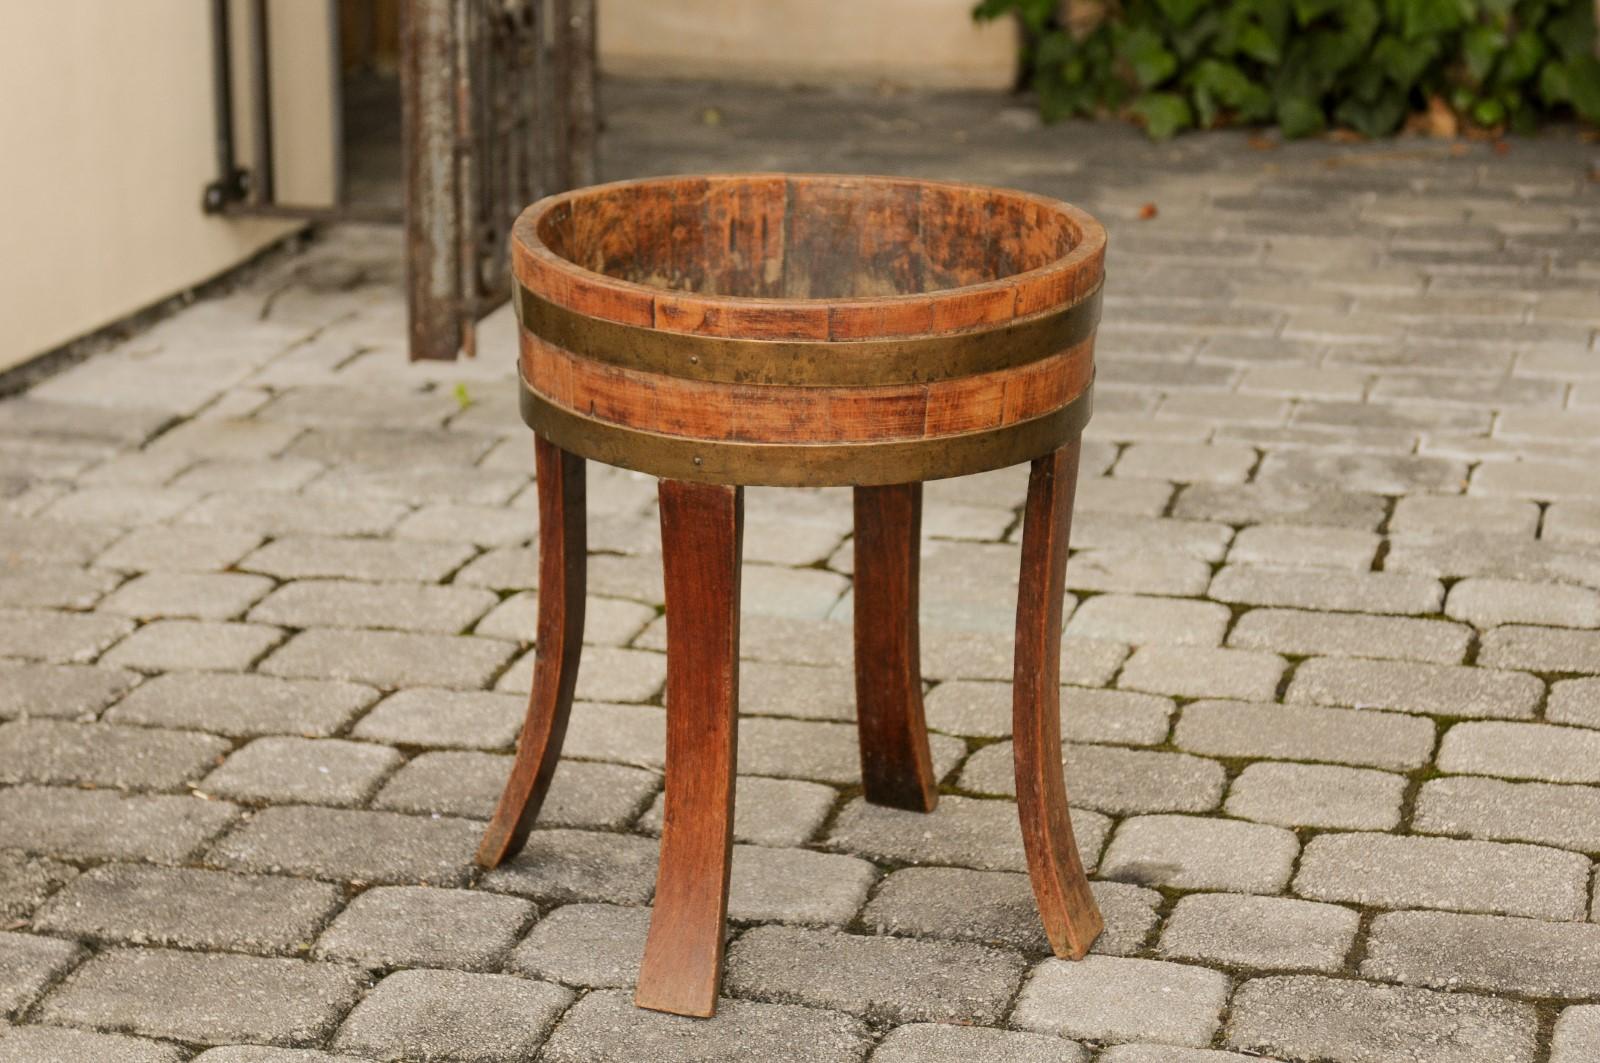 An English oak circular planter from the late 19th century, with later legs and brass accents. Born during the fourth quarter of the 19th century, this rustic oak planter features a circular body, accented with brass braces. The planter is mounted